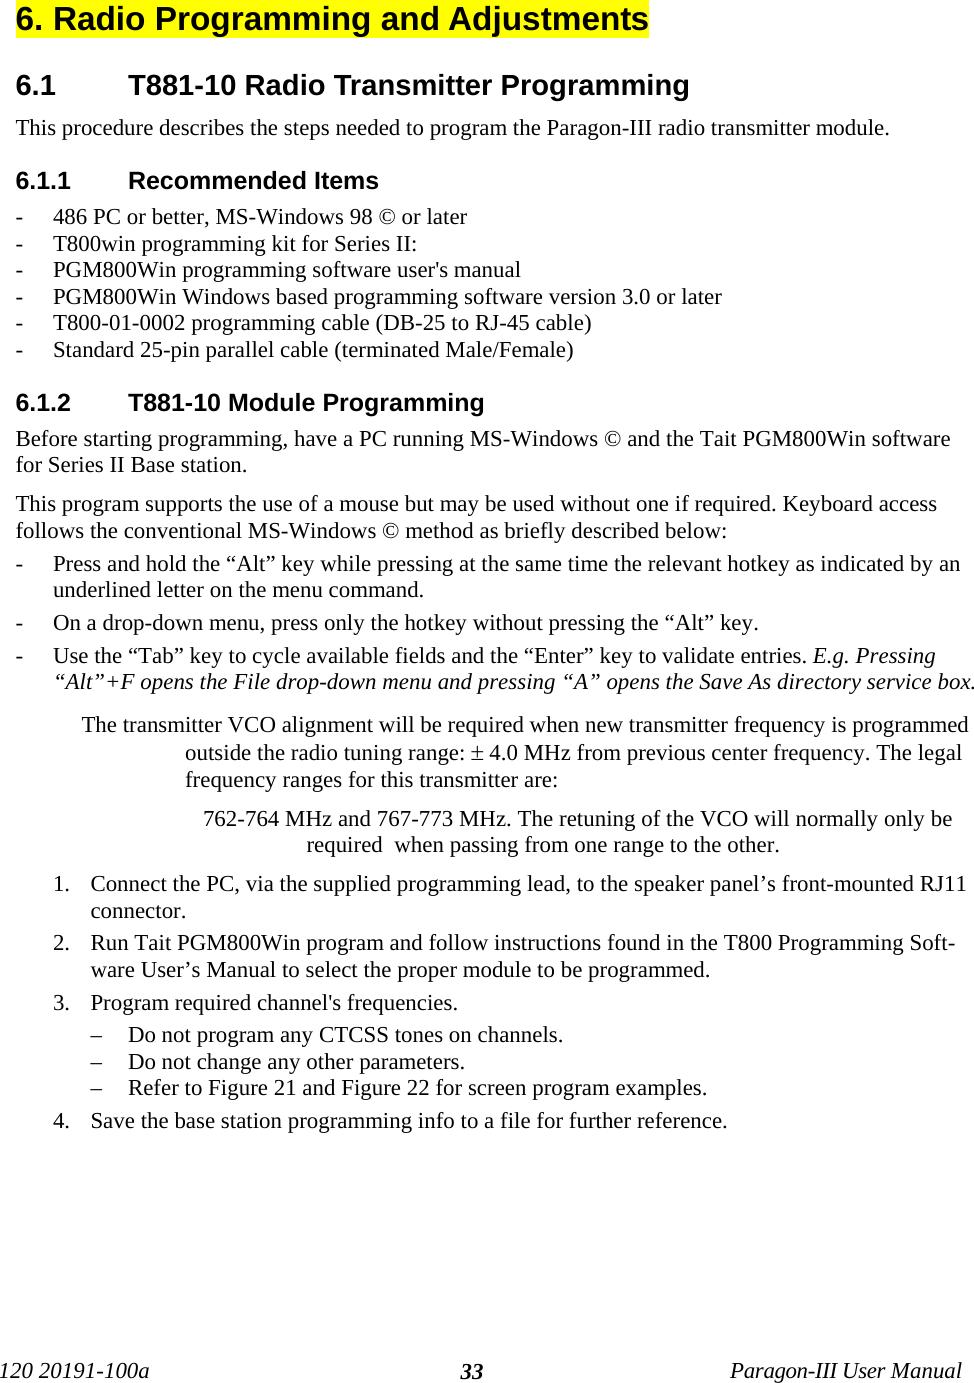 120 20191-100a Paragon-III User Manual336. Radio Programming and Adjustments6.1  T881-10 Radio Transmitter ProgrammingThis procedure describes the steps needed to program the Paragon-III radio transmitter module. 6.1.1  Recommended Items- 486 PC or better, MS-Windows 98 © or later- T800win programming kit for Series II:- PGM800Win programming software user&apos;s manual- PGM800Win Windows based programming software version 3.0 or later- T800-01-0002 programming cable (DB-25 to RJ-45 cable)- Standard 25-pin parallel cable (terminated Male/Female)6.1.2  T881-10 Module ProgrammingBefore starting programming, have a PC running MS-Windows © and the Tait PGM800Win softwarefor Series II Base station. This program supports the use of a mouse but may be used without one if required. Keyboard accessfollows the conventional MS-Windows © method as briefly described below:- Press and hold the “Alt” key while pressing at the same time the relevant hotkey as indicated by anunderlined letter on the menu command.- On a drop-down menu, press only the hotkey without pressing the “Alt” key. - Use the “Tab” key to cycle available fields and the “Enter” key to validate entries. E.g. Pressing“Alt”+F opens the File drop-down menu and pressing “A” opens the Save As directory service box. The transmitter VCO alignment will be required when new transmitter frequency is programmedoutside the radio tuning range: ± 4.0 MHz from previous center frequency. The legalfrequency ranges for this transmitter are:762-764 MHz and 767-773 MHz. The retuning of the VCO will normally only berequired  when passing from one range to the other.1. Connect the PC, via the supplied programming lead, to the speaker panel’s front-mounted RJ11connector.2. Run Tait PGM800Win program and follow instructions found in the T800 Programming Soft-ware User’s Manual to select the proper module to be programmed.3. Program required channel&apos;s frequencies.– Do not program any CTCSS tones on channels.– Do not change any other parameters.– Refer to Figure 21 and Figure 22 for screen program examples.4. Save the base station programming info to a file for further reference. 